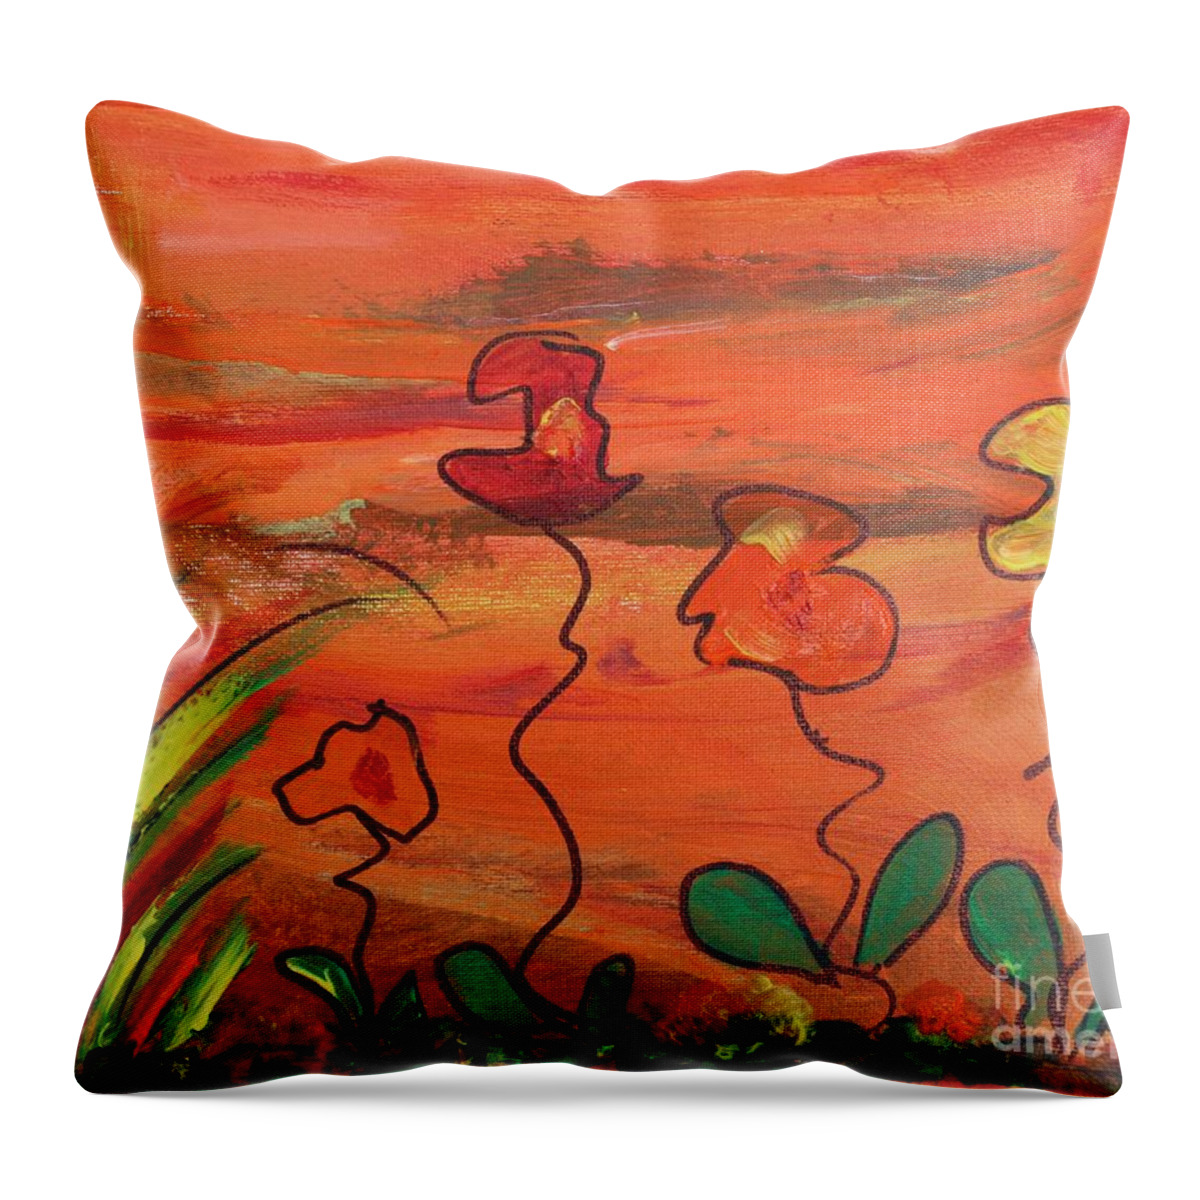 Happy Day Throw Pillow featuring the painting Happy Day by Sarahleah Hankes